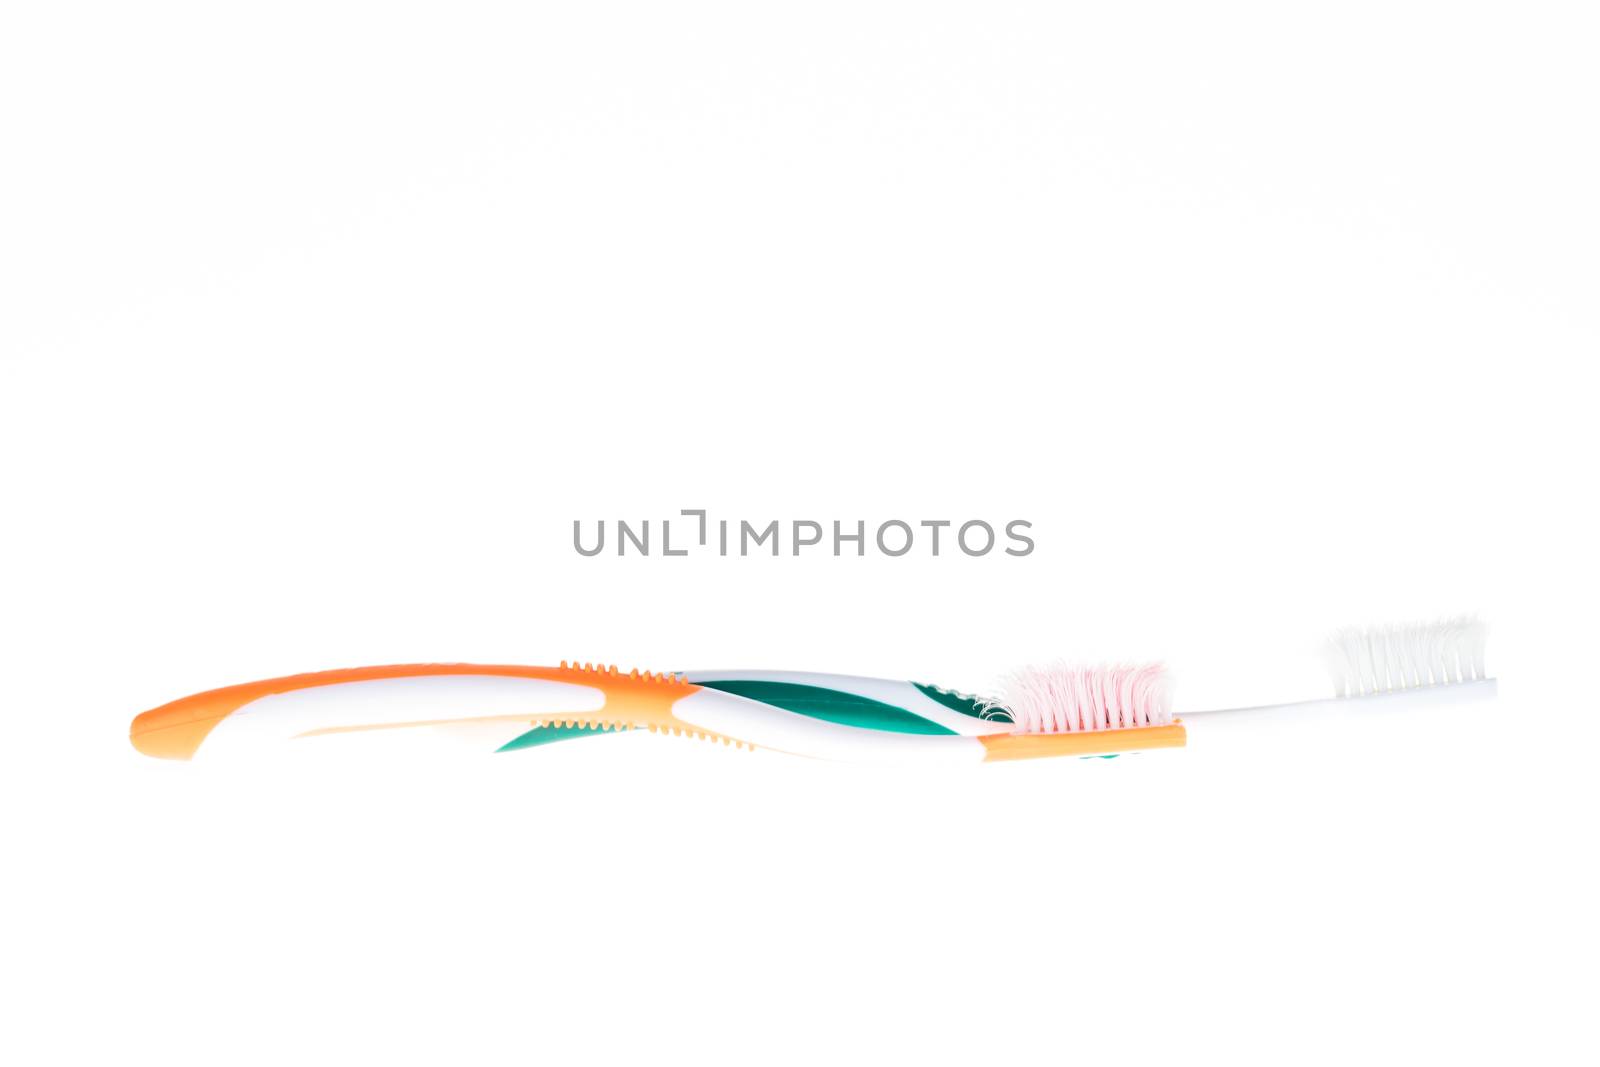 Two Color worn toothbrush on isolated white background by iamway